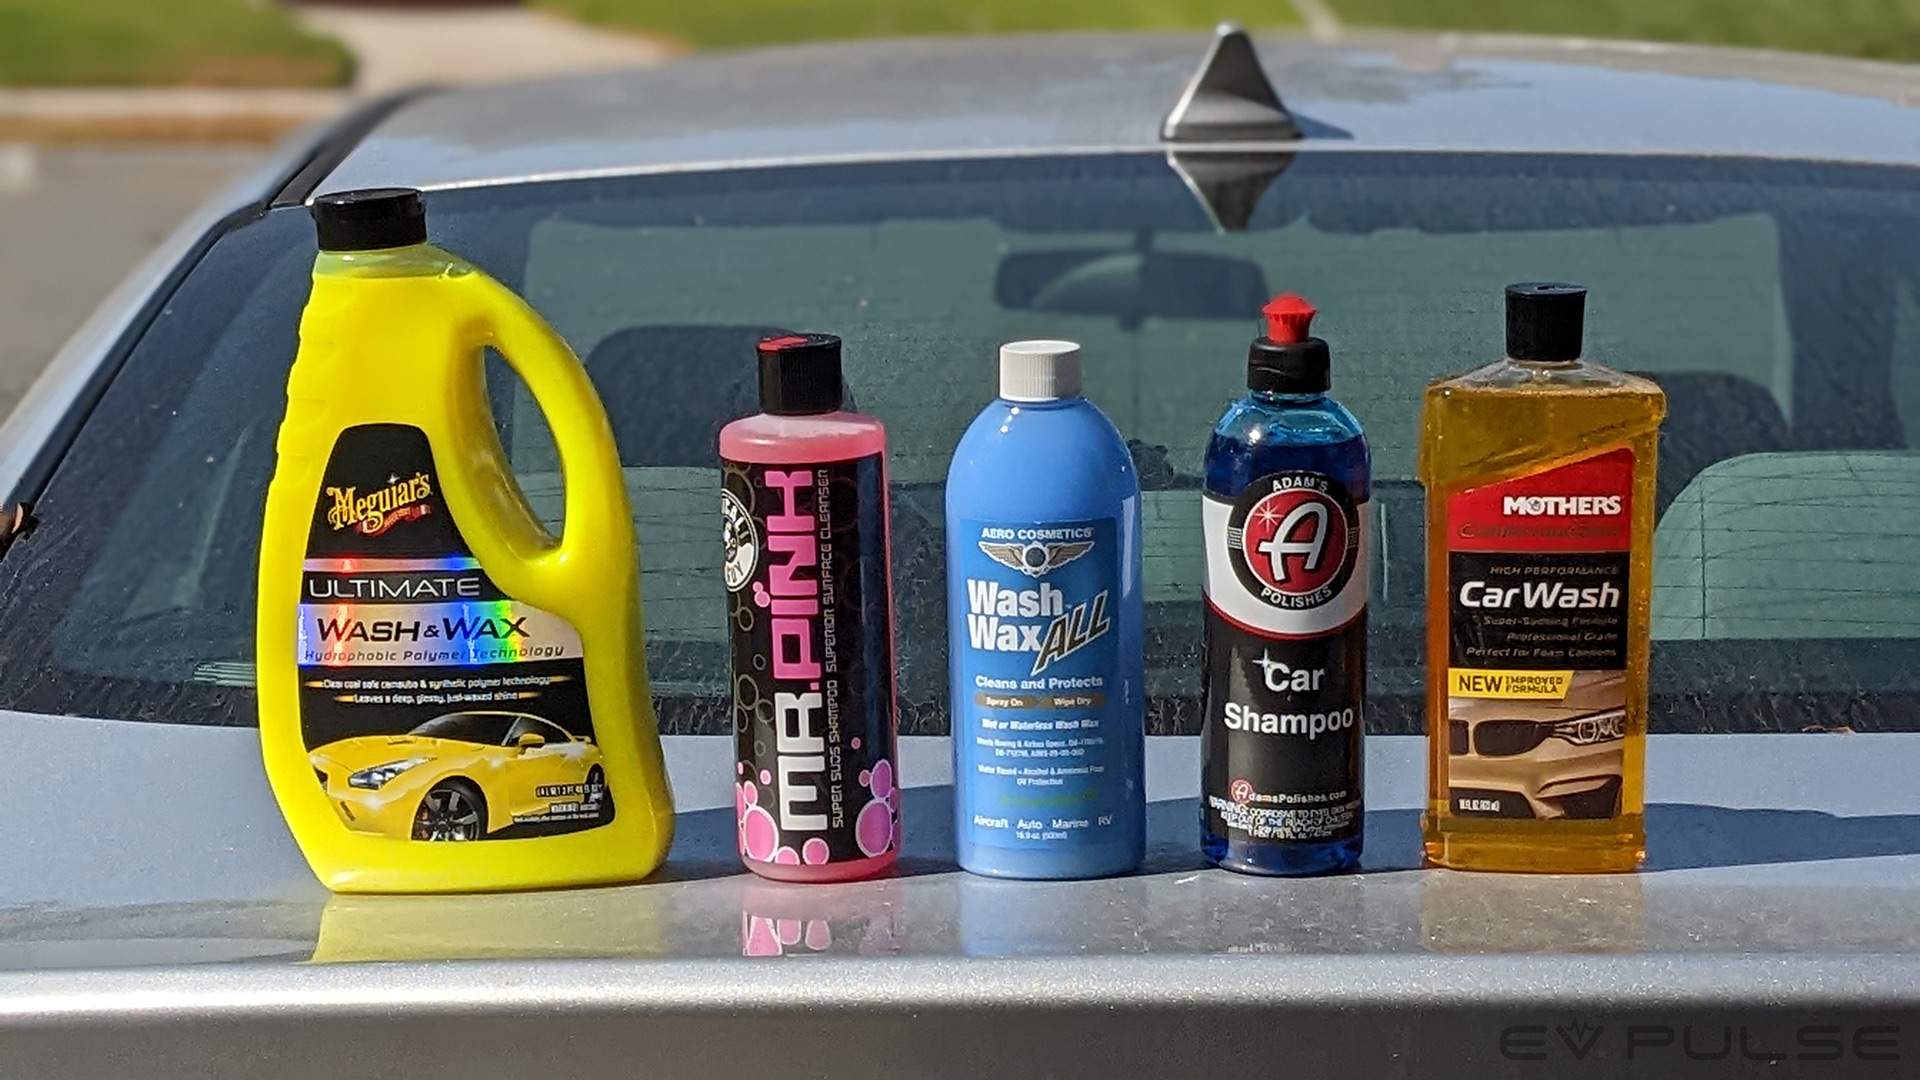 Adam's Essentials Complete Car Detailing Upgraded Kit - The Essentials for  Detailing by Hand - Clean, Protect, and Shine Your Entire Car - Retain T  